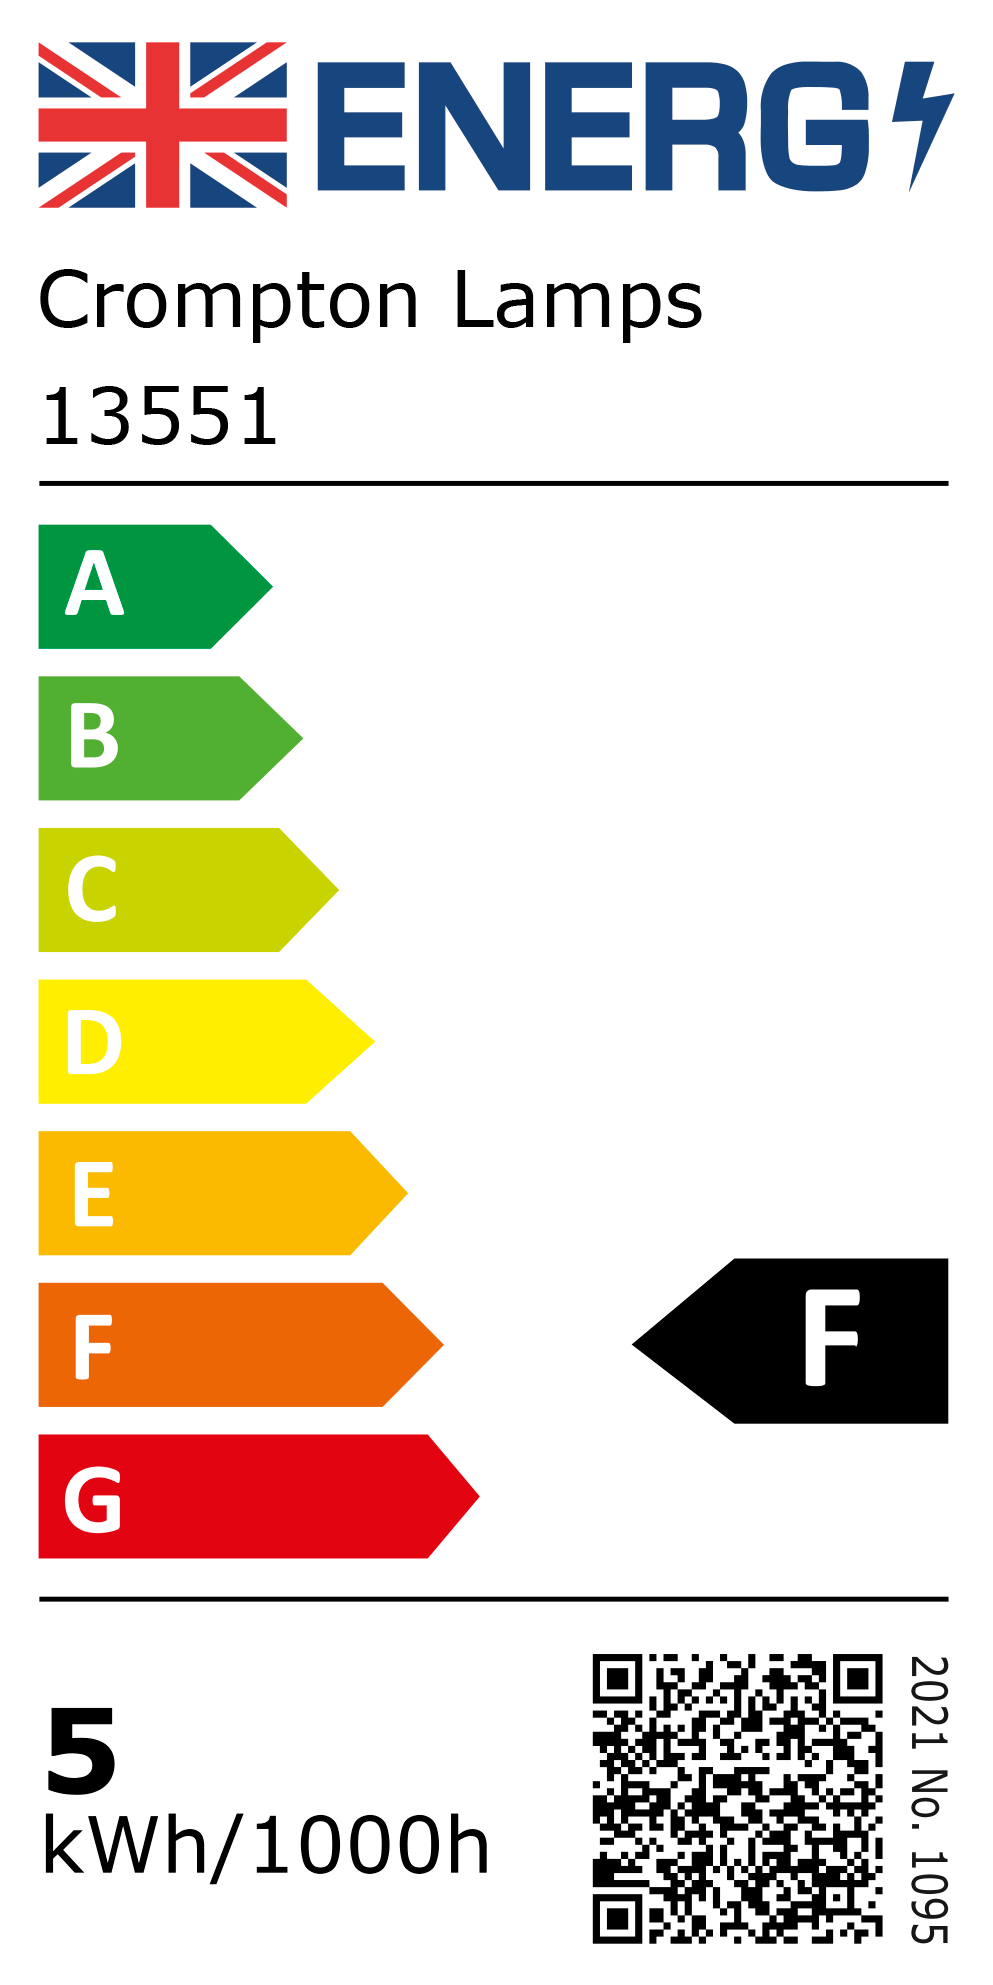 New 2021 Energy Rating Label: Stock Code 13551